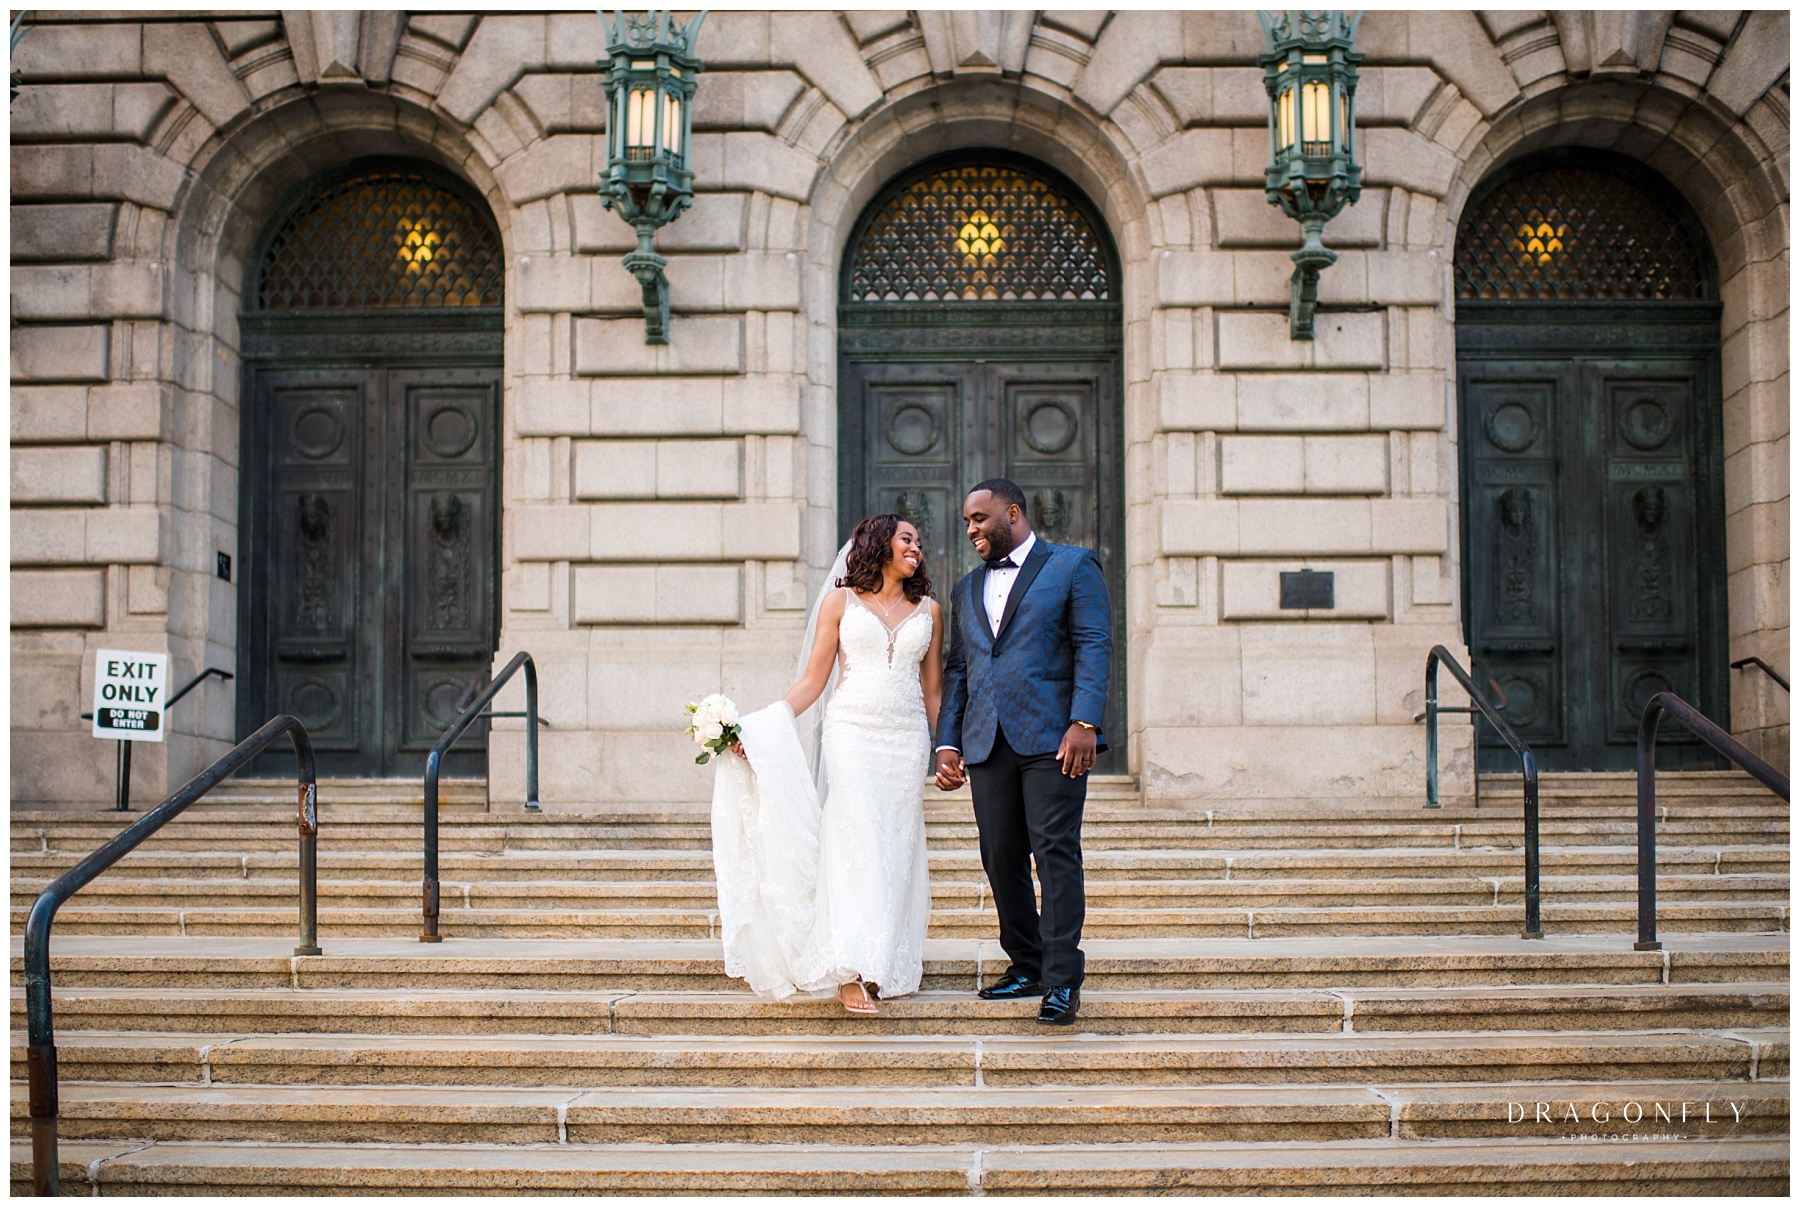 Old Courthouse Cleveland Wedding - Dragonfly Photography